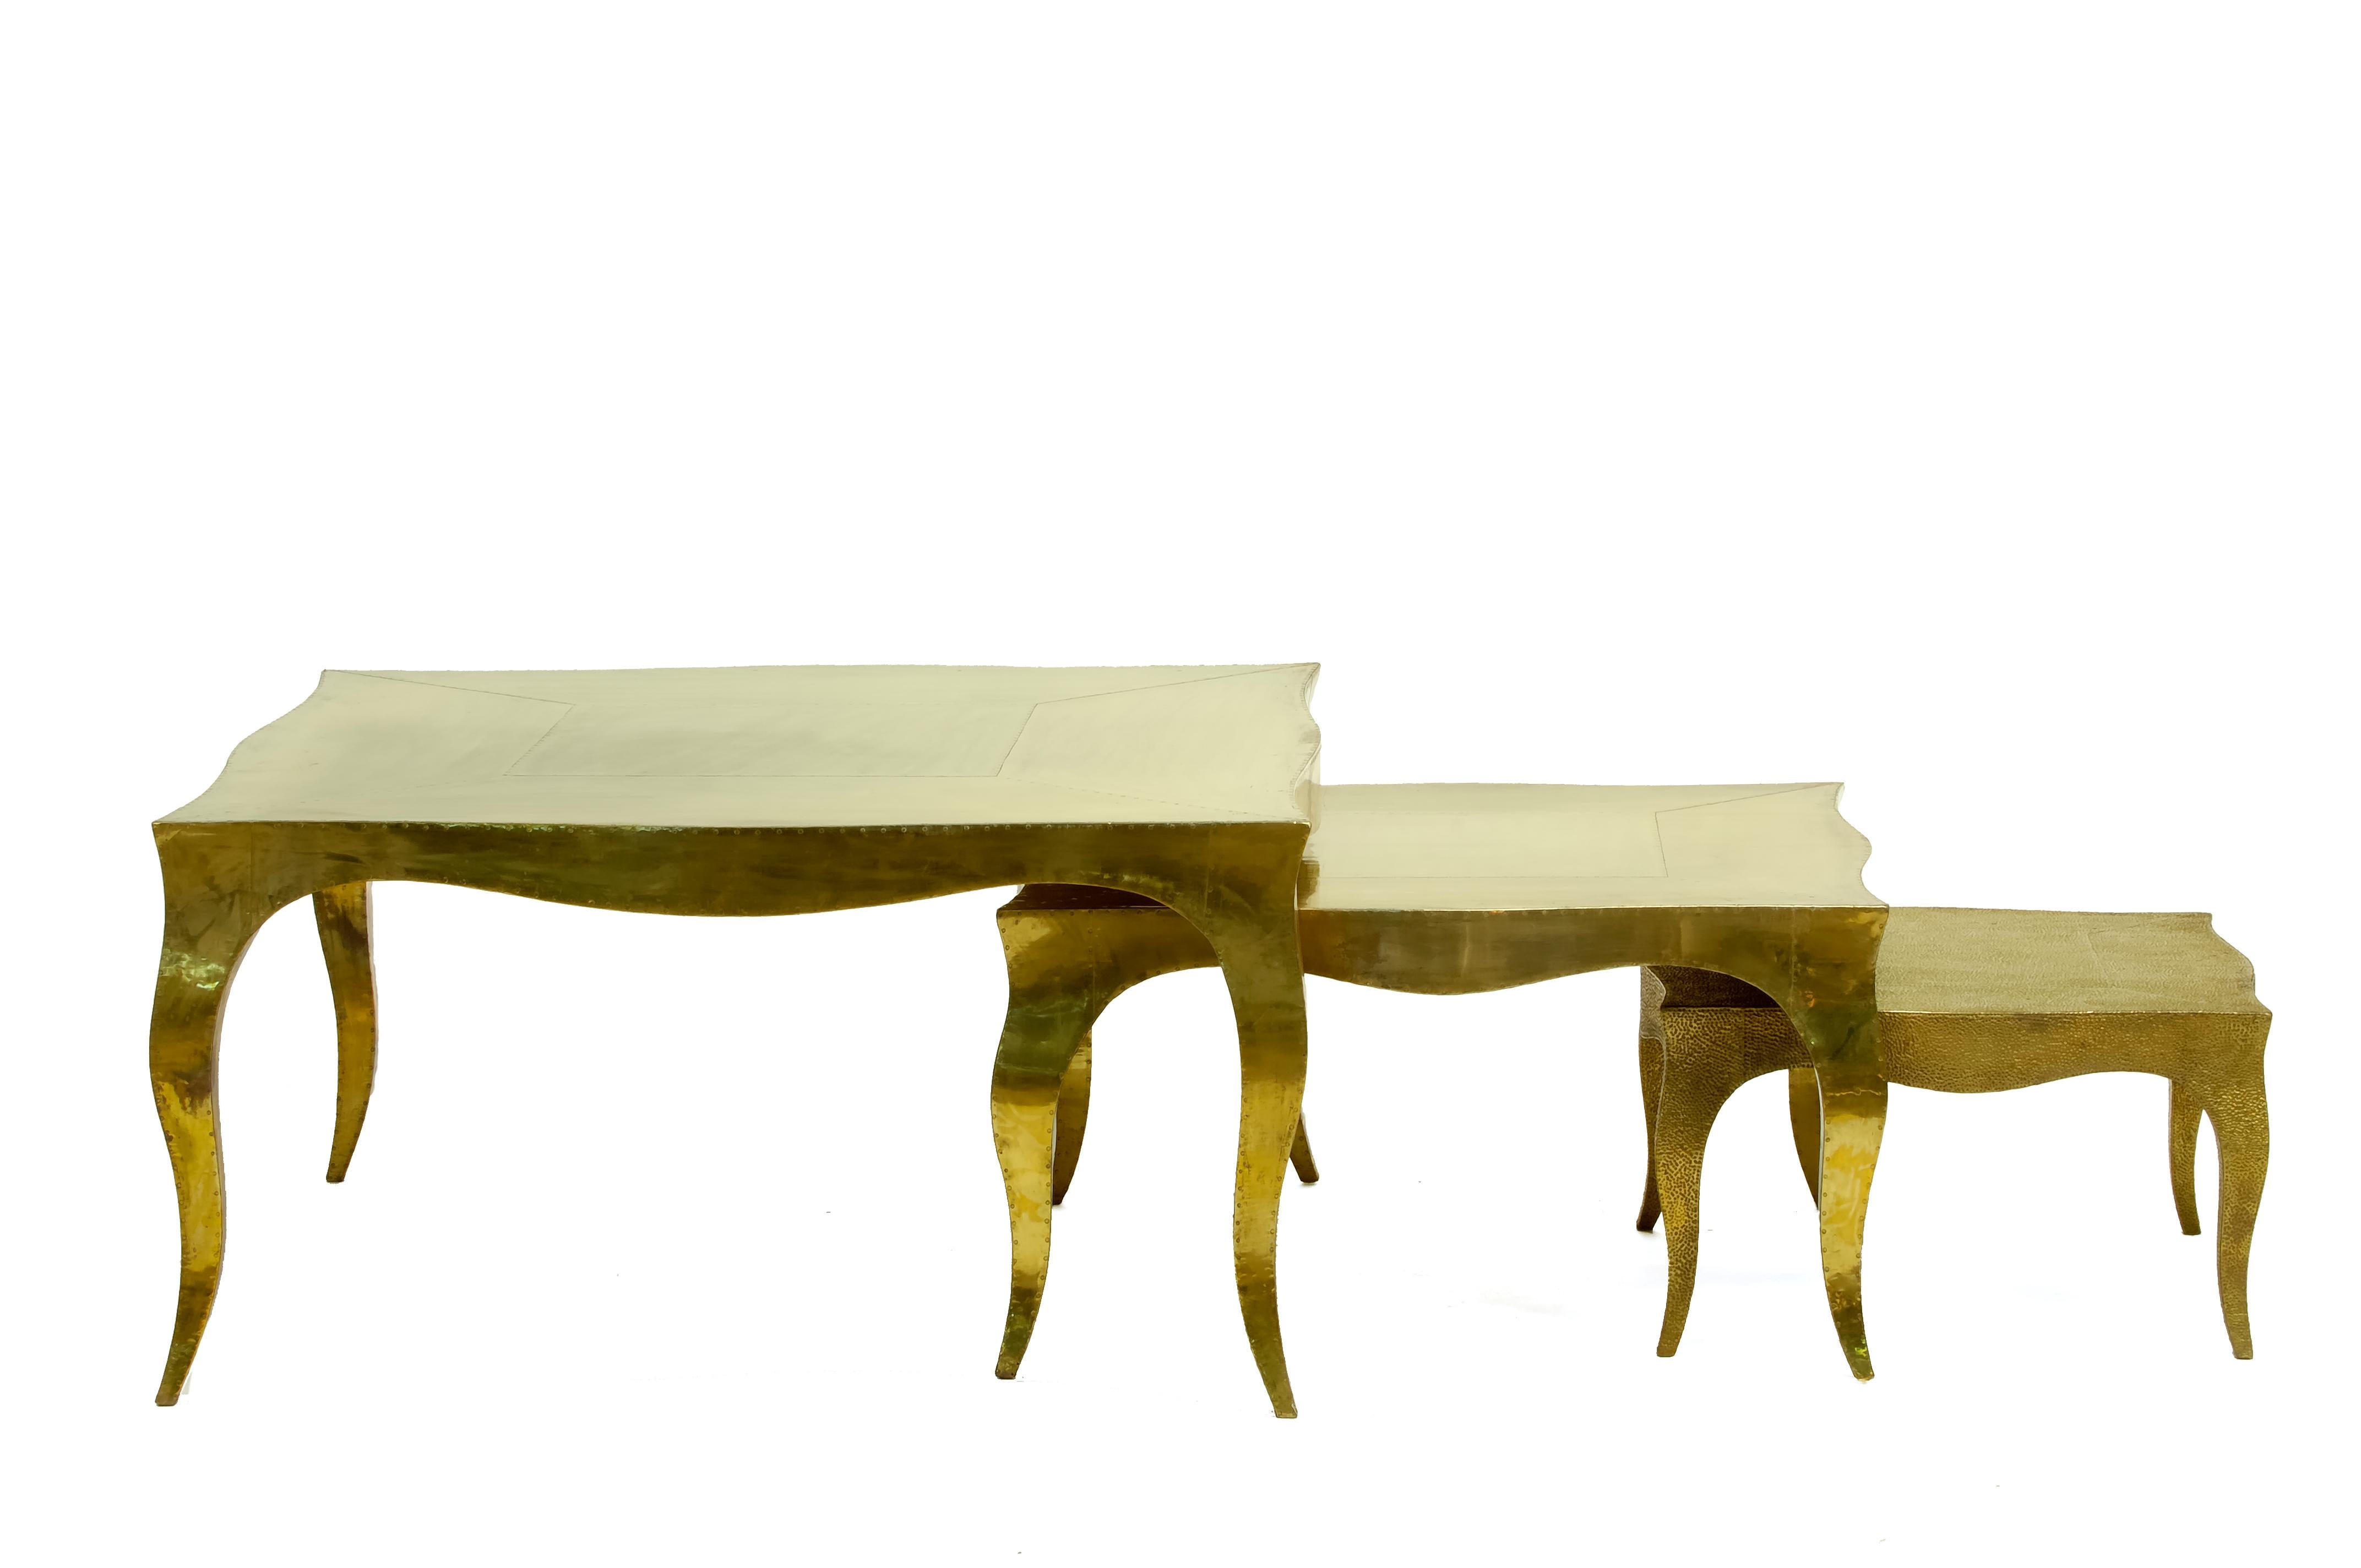 Louise Art Deco Industrial and Work Tables Mid. Hammered Copper by Paul Mathieu For Sale 5